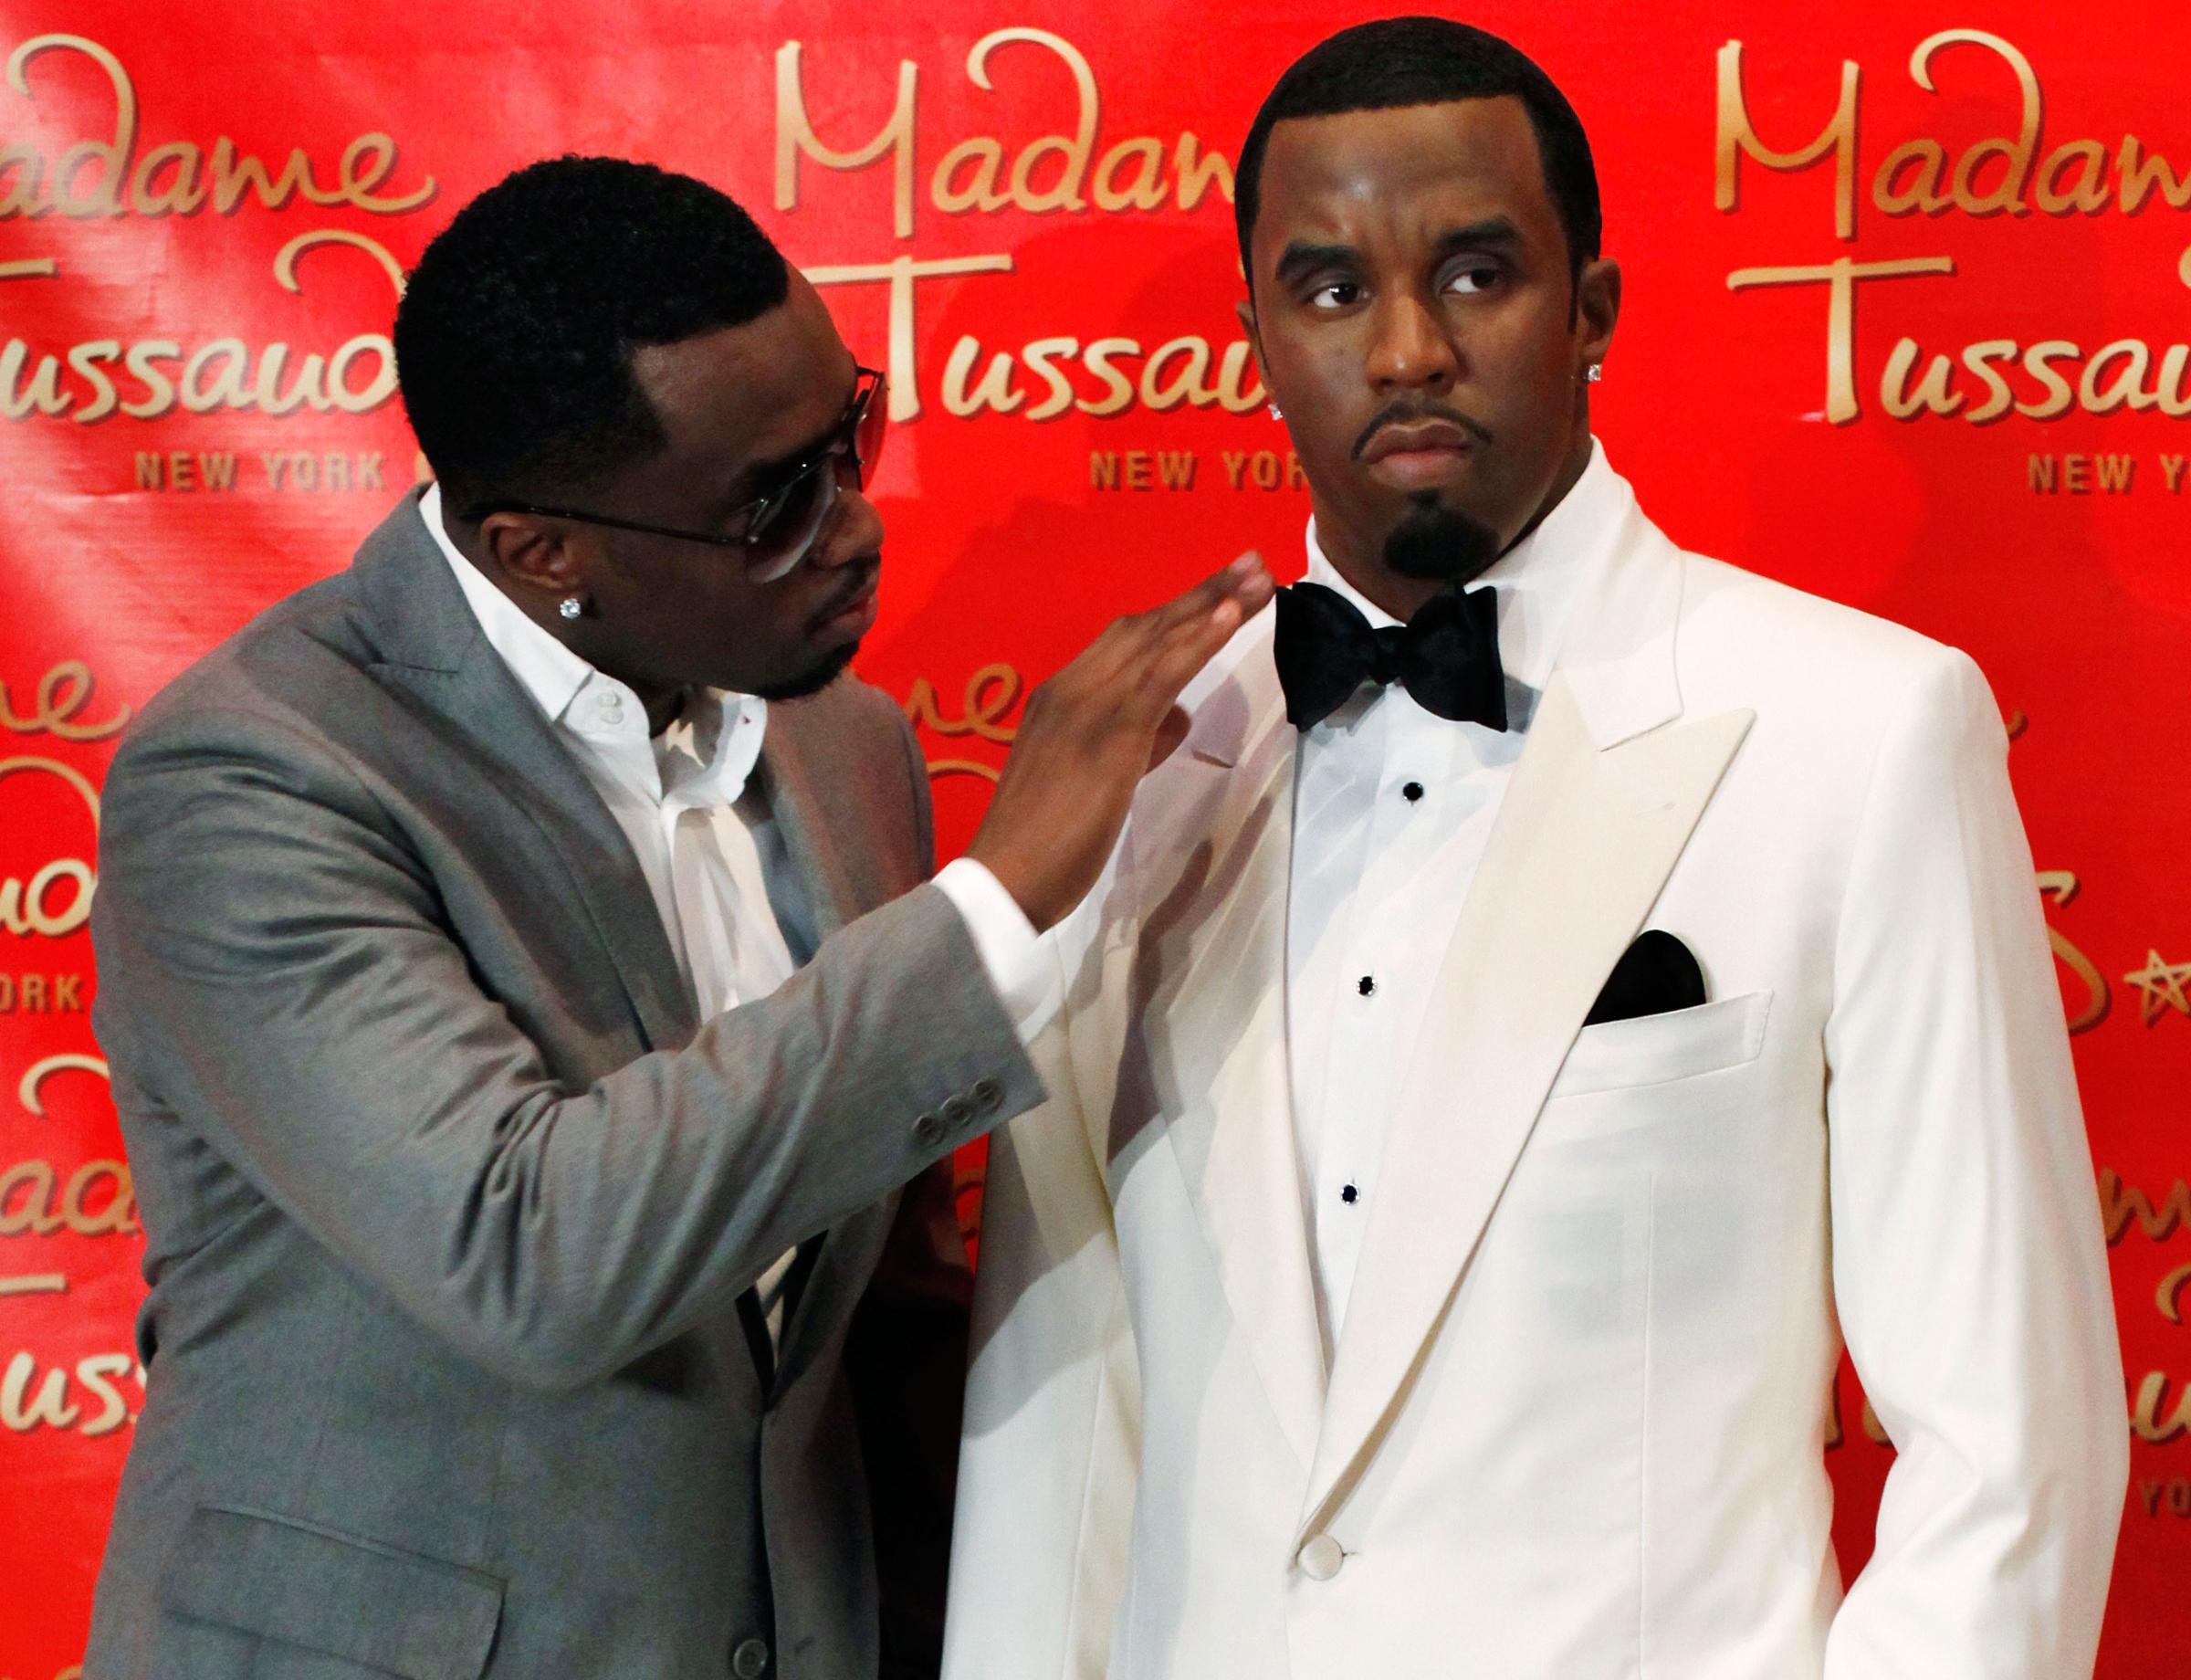 Sean "Diddy" Combs touches his wax figure at Madame Tussauds in New York